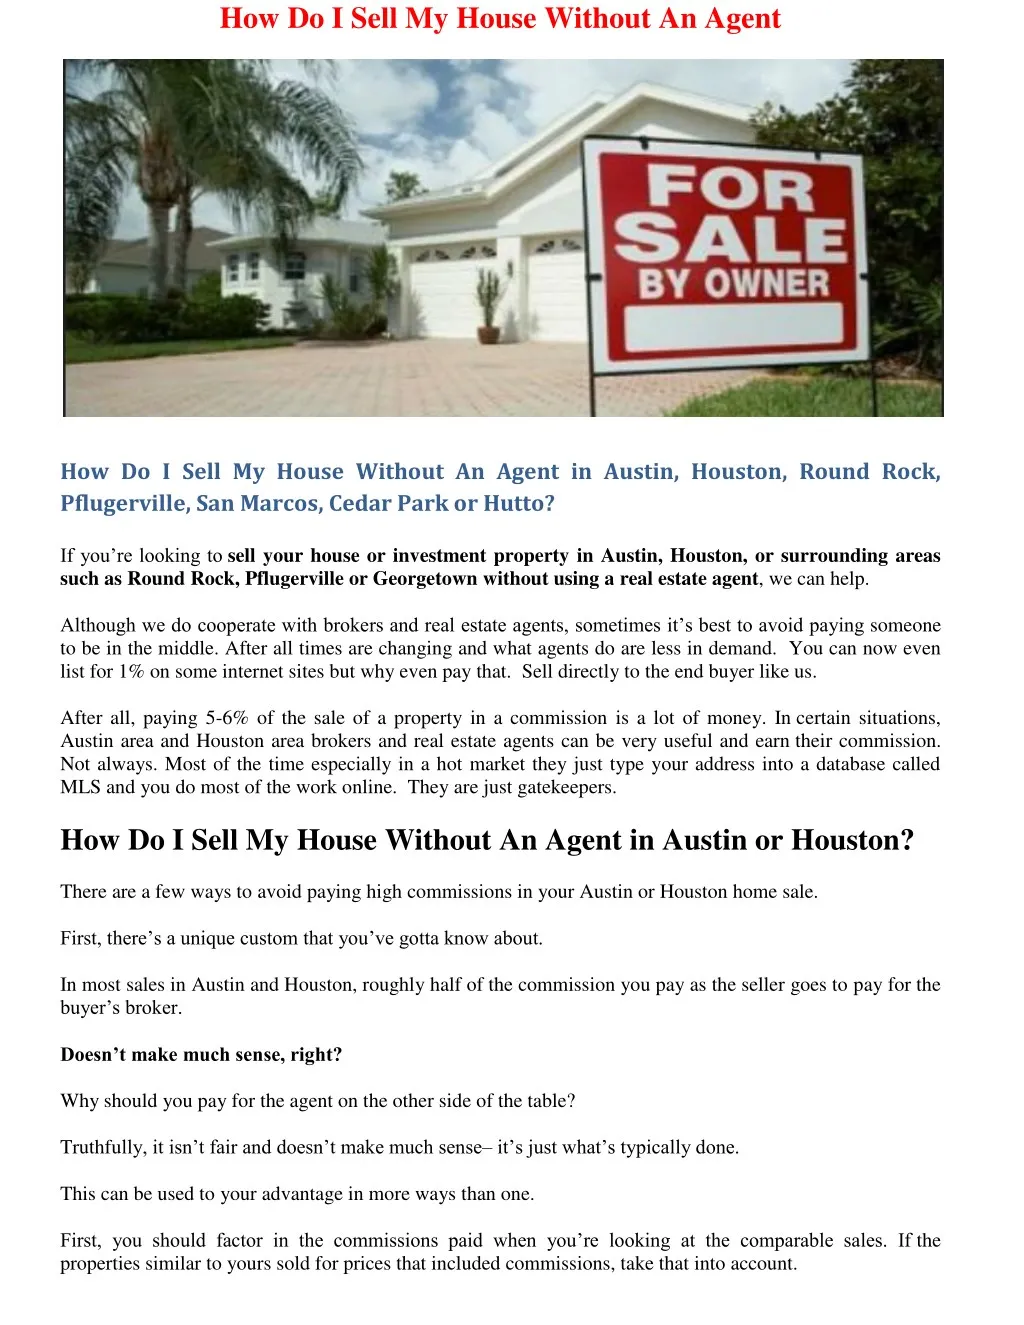 how do i sell my house without an agent